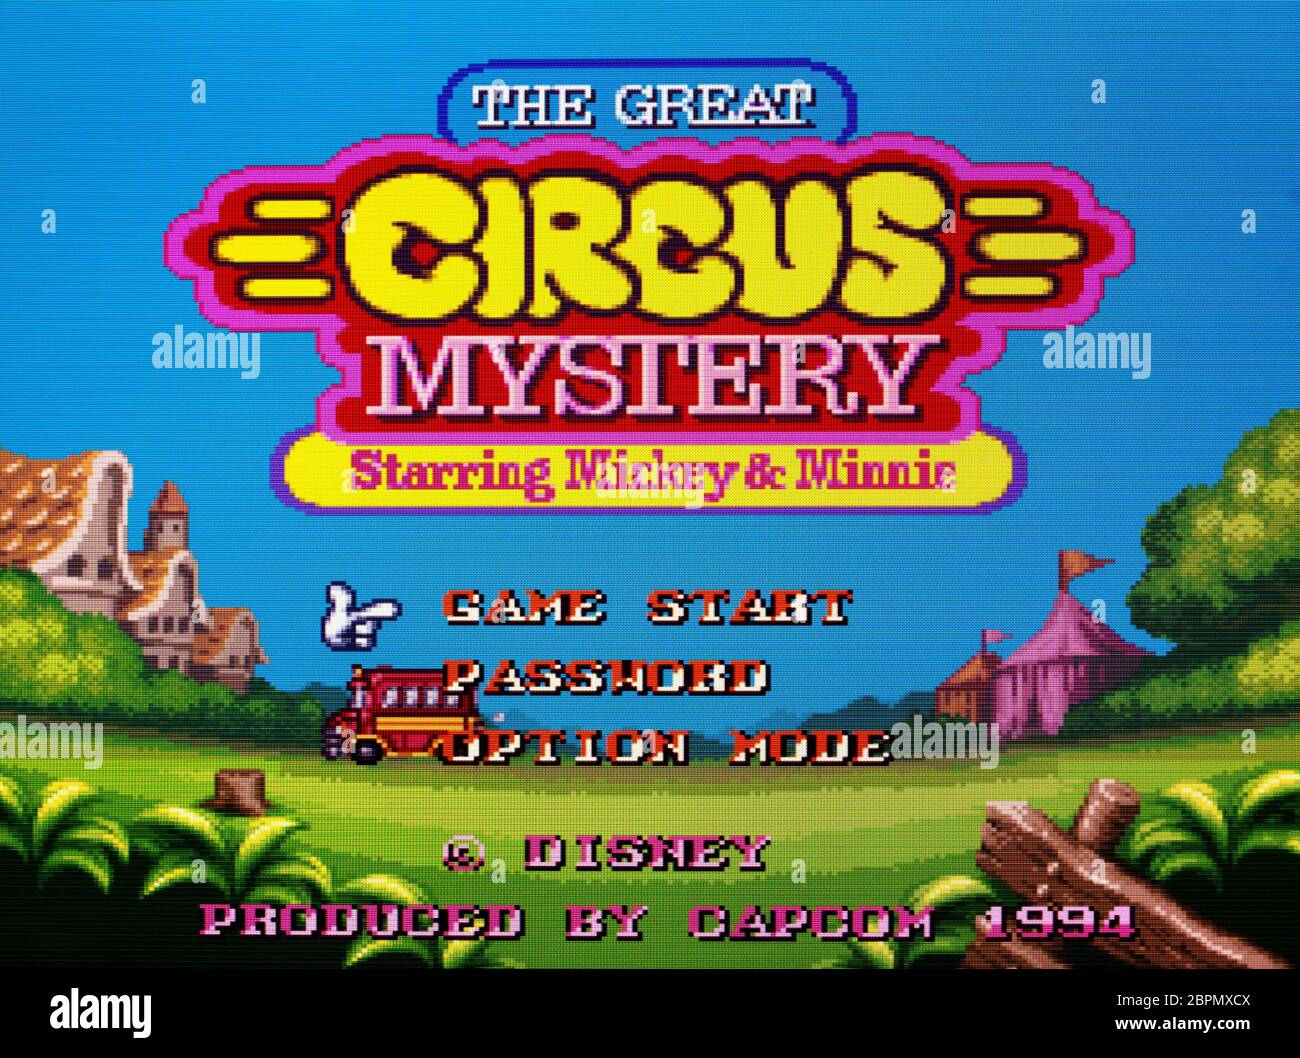 the great circus mystery starring mickey and minnie mouse